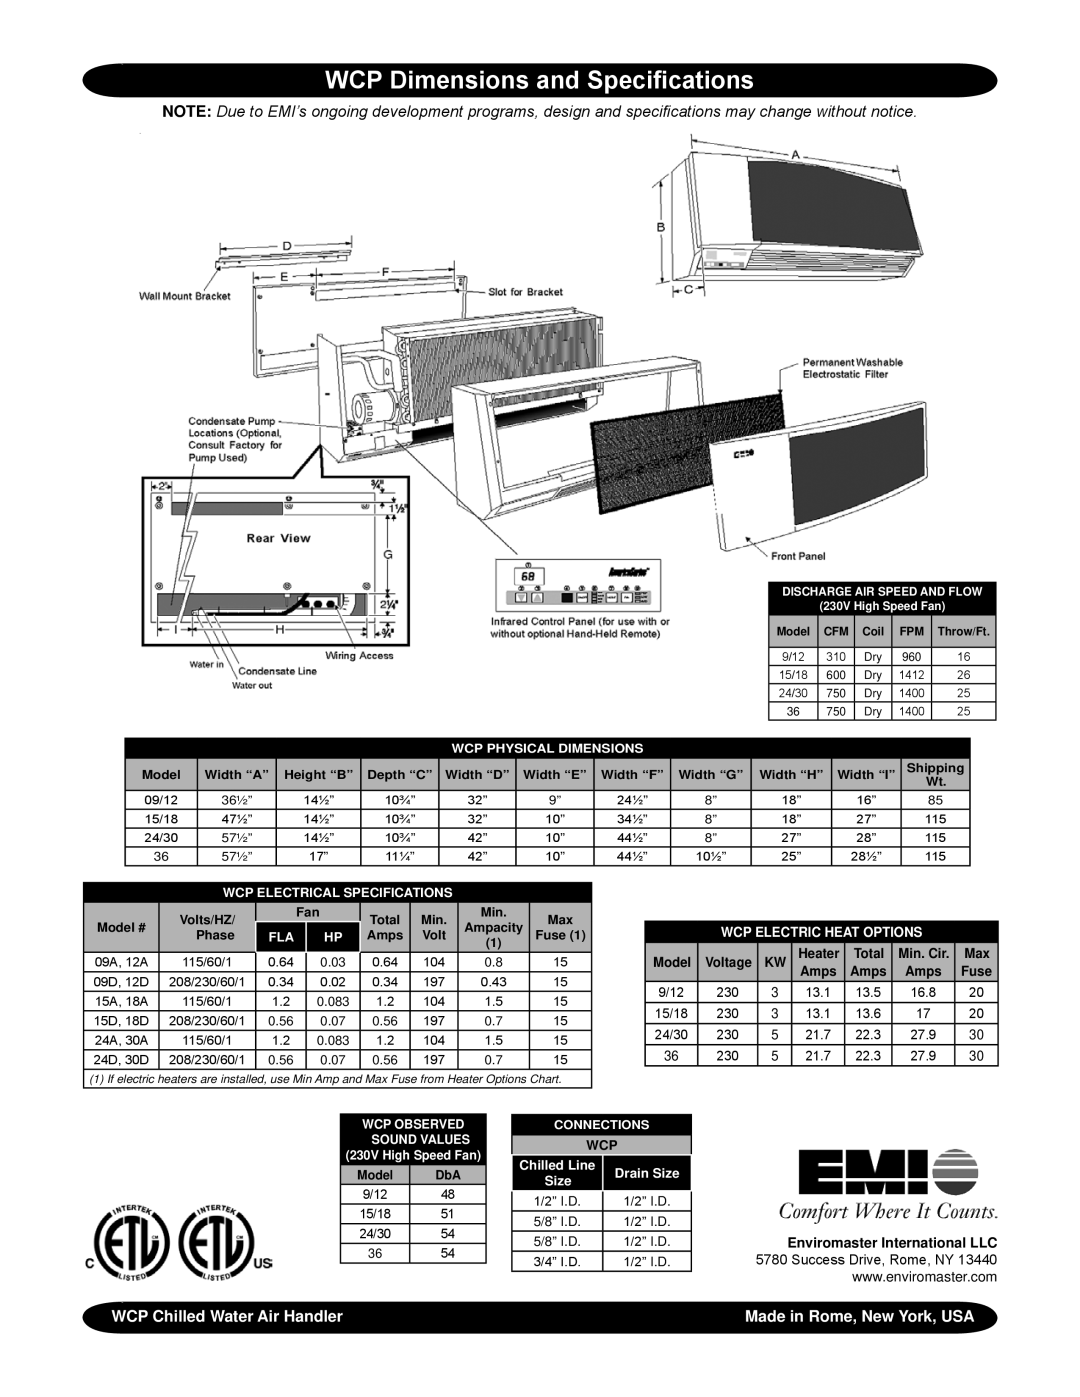 EMI WCP Chilled Water Air Handler, Made in Rome, New York, USA, WCP Dimensions and Specifications, 230V High Speed Fan 